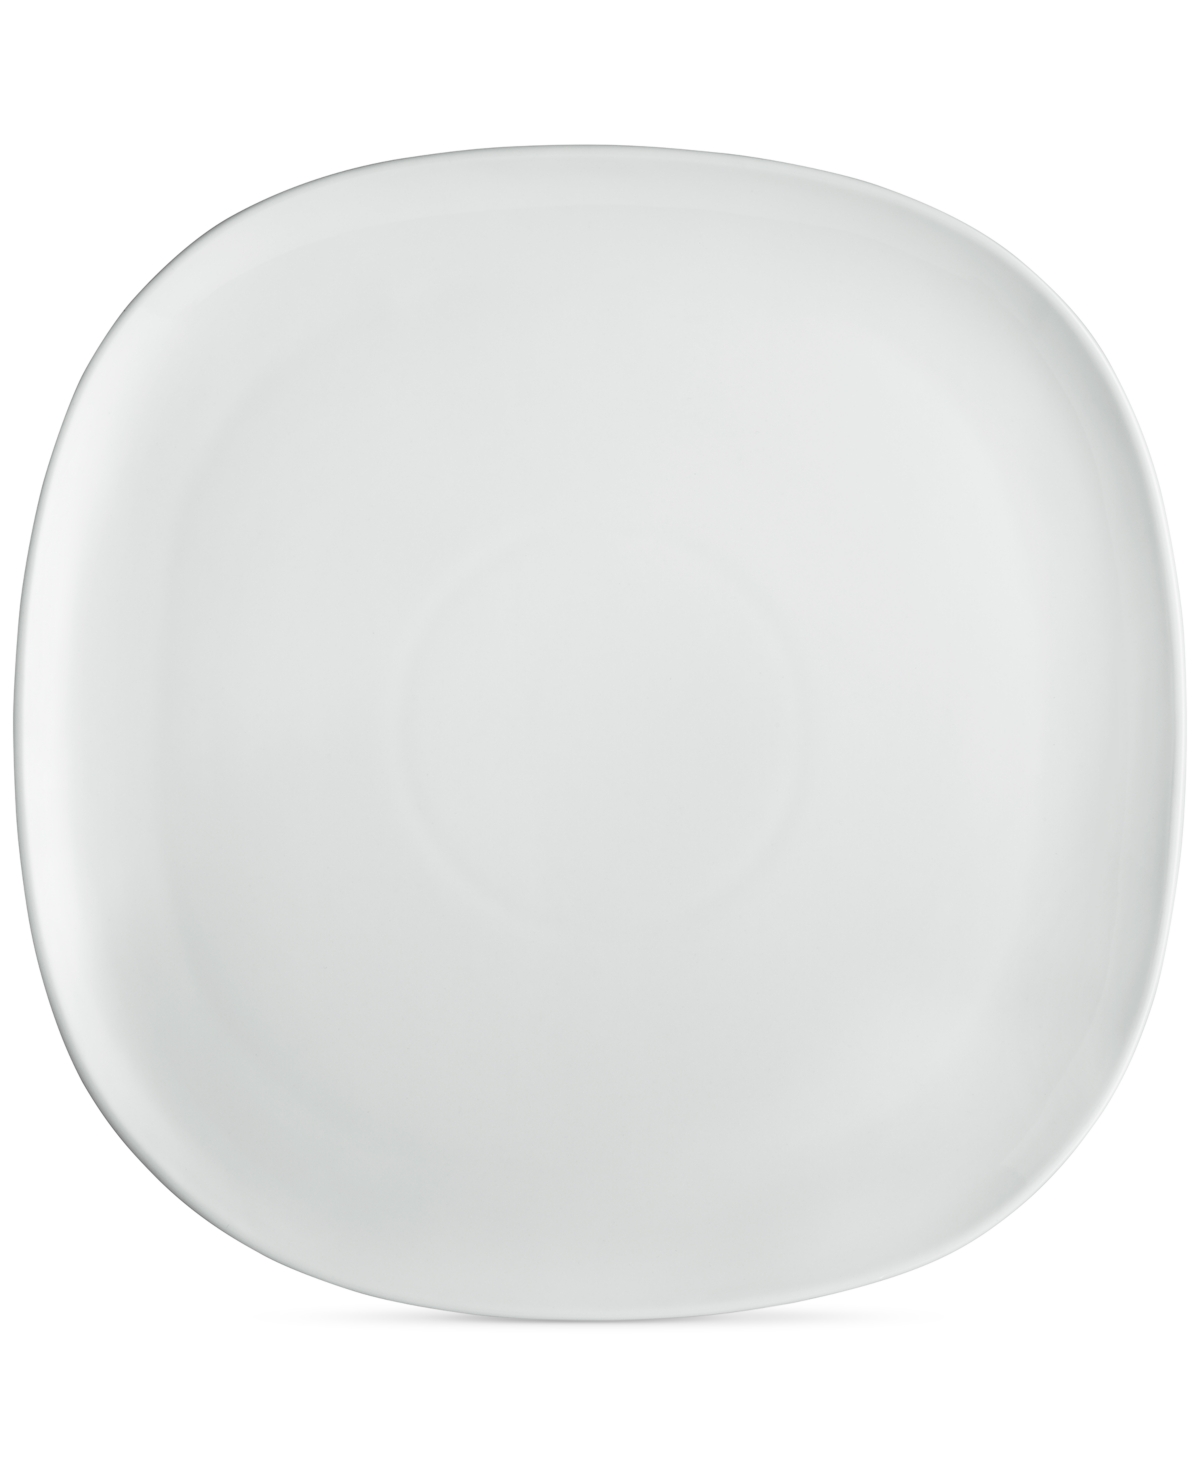 Whiteware Soft Square Salad Plate, Created for Macy's - White